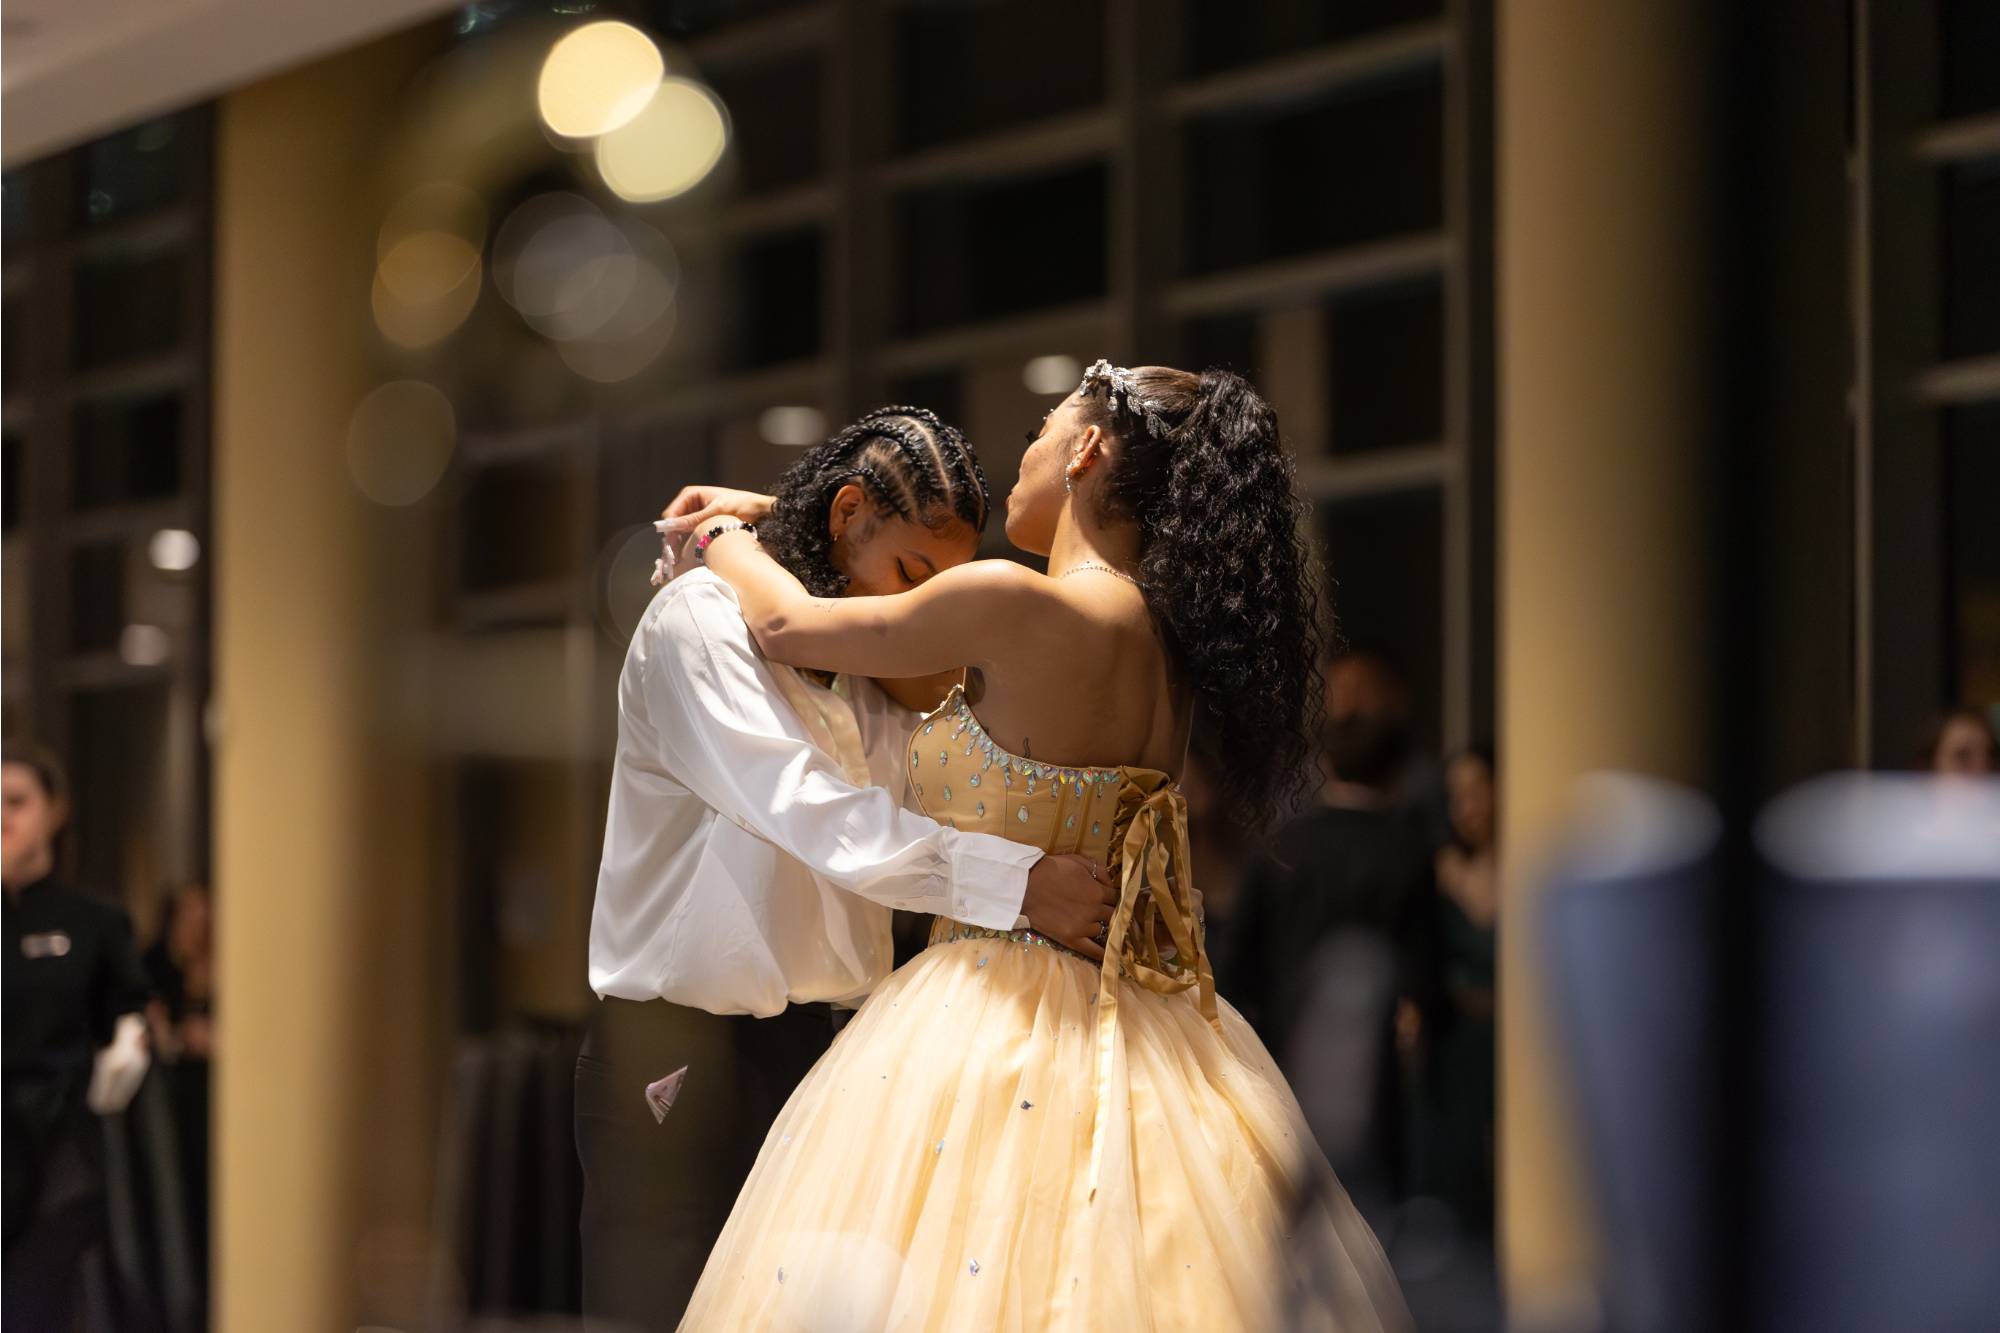 Two people dancing together at Presidents' Ball